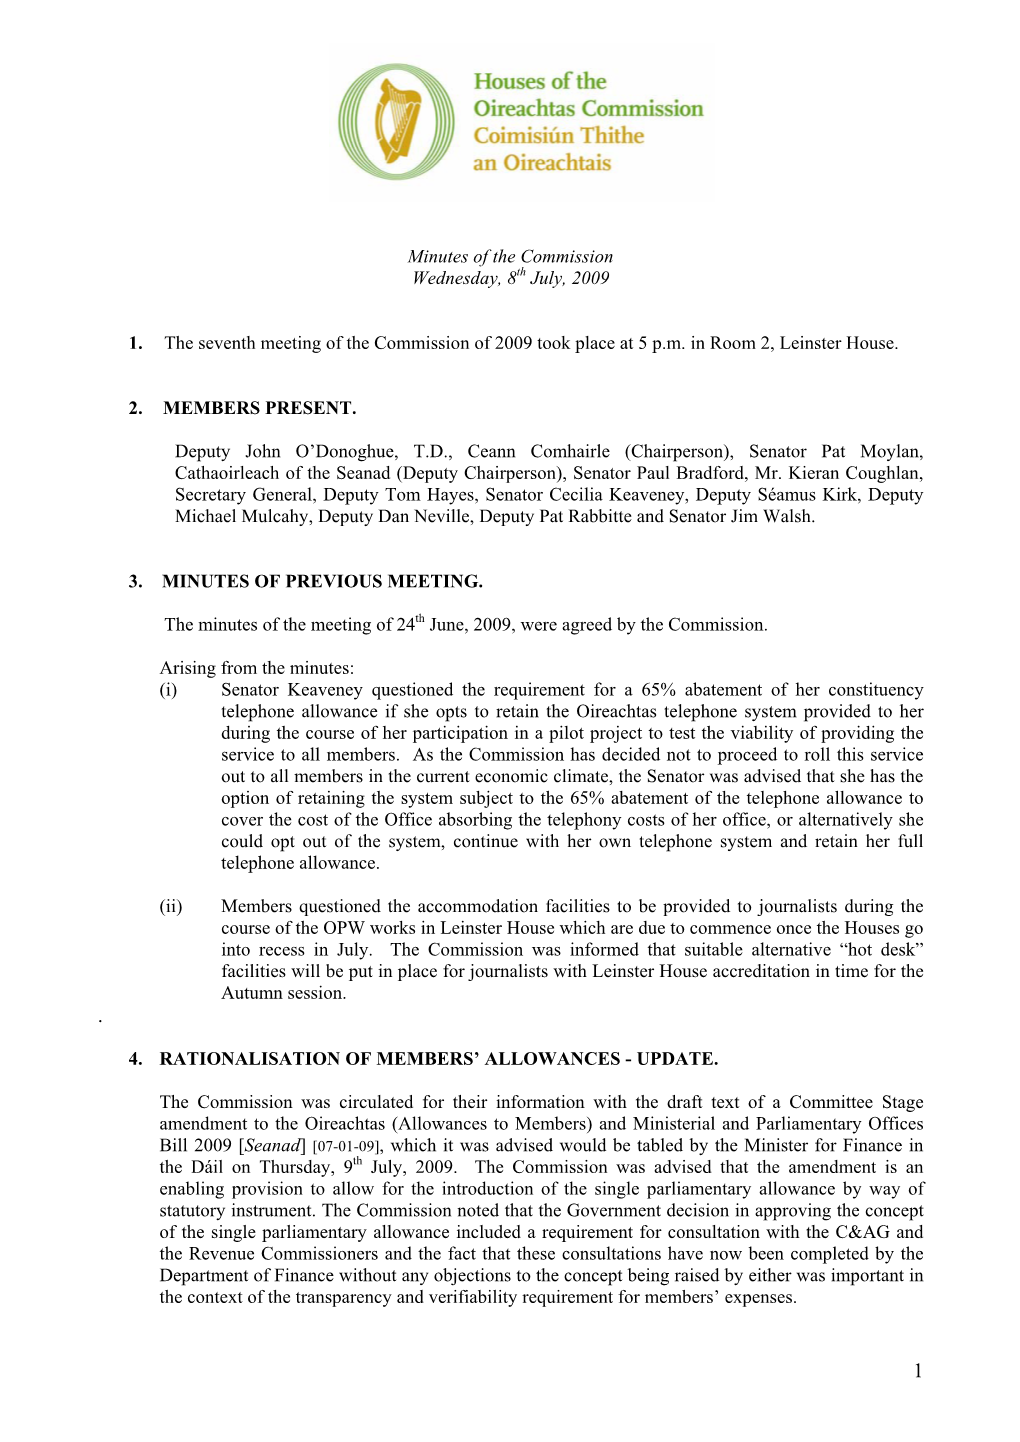 Houses of the Oireachtas Commission Minutes of Meeting of 8 July 2009